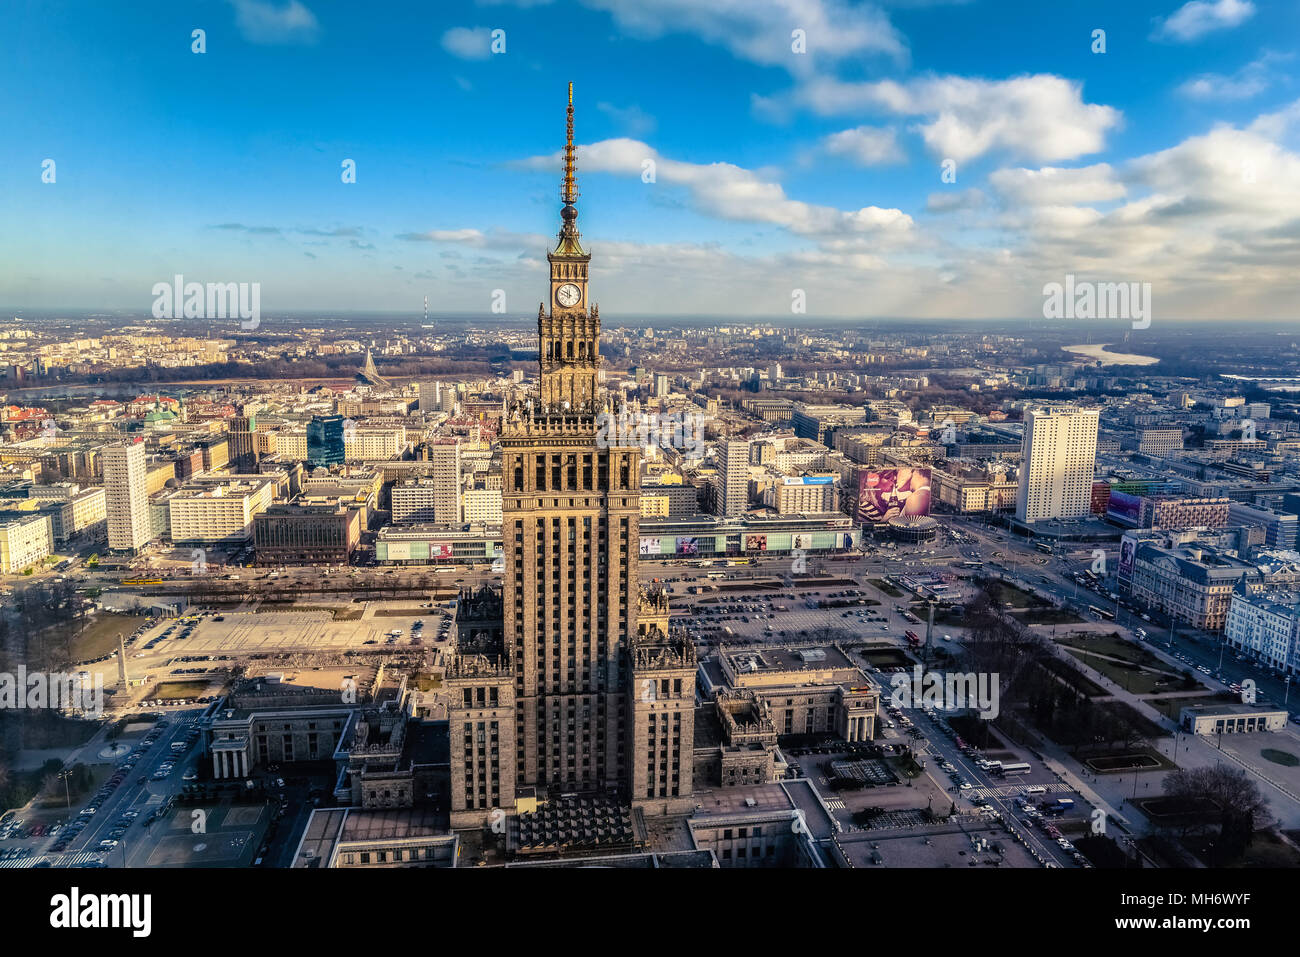 Warsaw / Poland - 02.16.2016: Aerial view of the Palace of Culture and Science at sunrise. Horizontal. Stock Photo